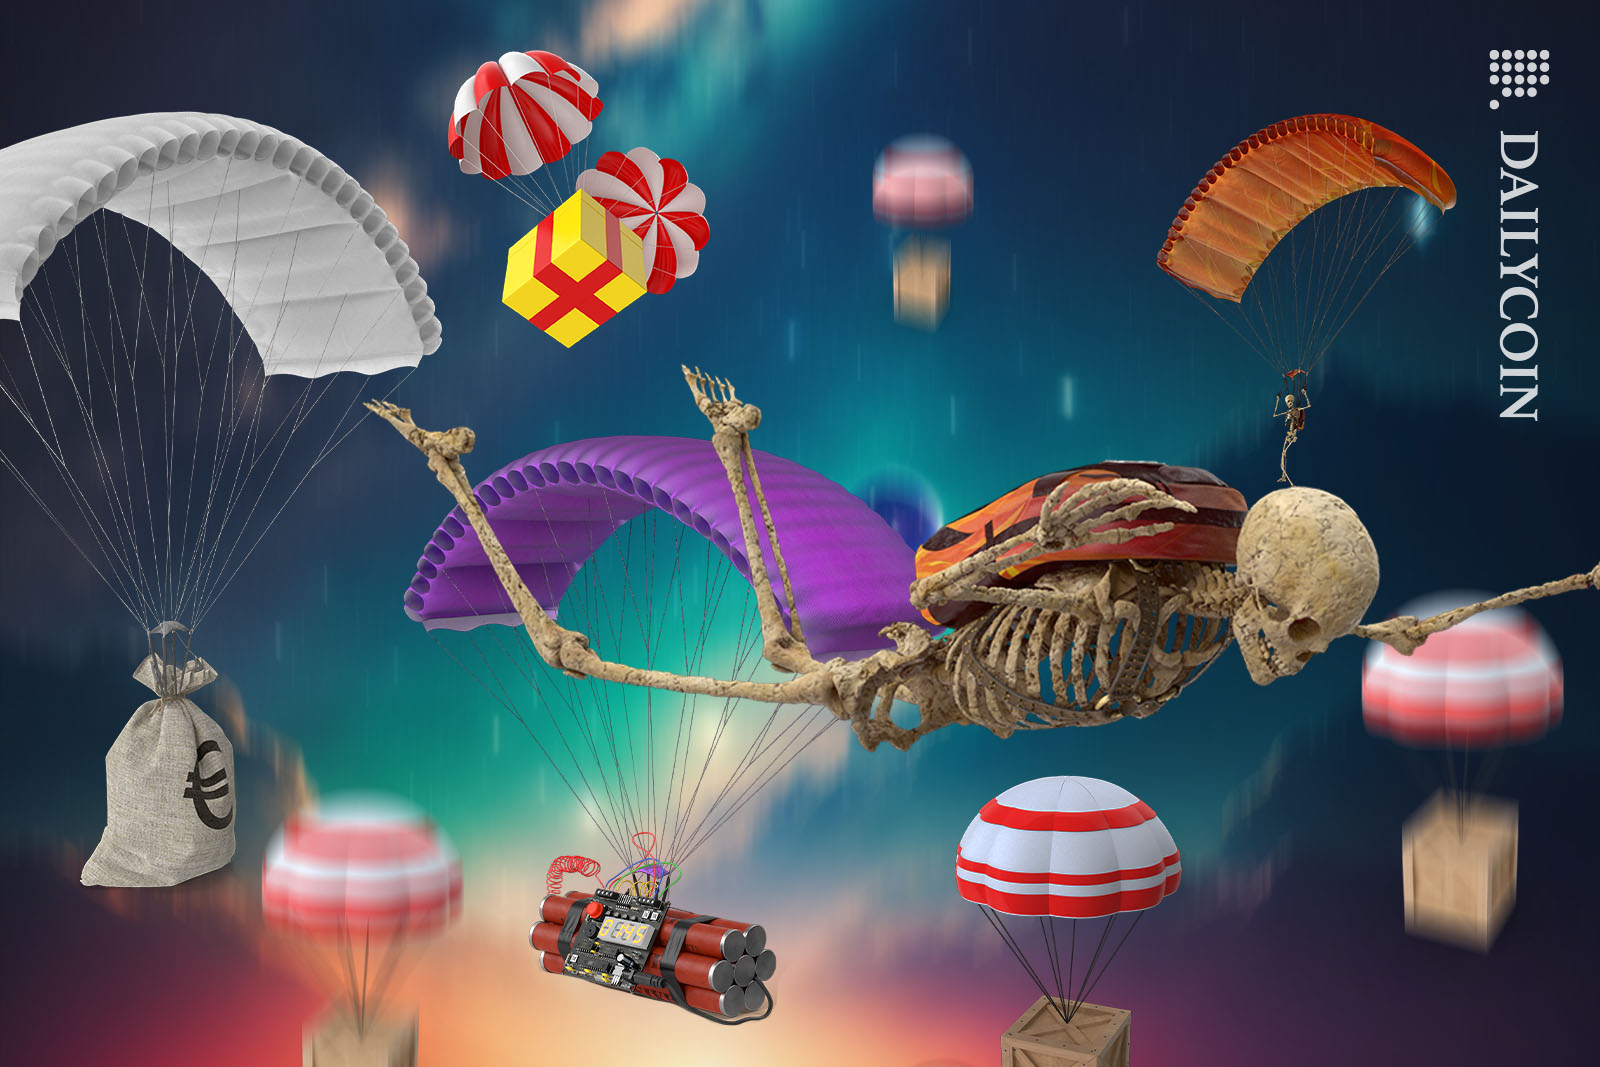 Gifts, money, bombs and skeletons parachuting down from the sky, with a skeleton in the foreground.